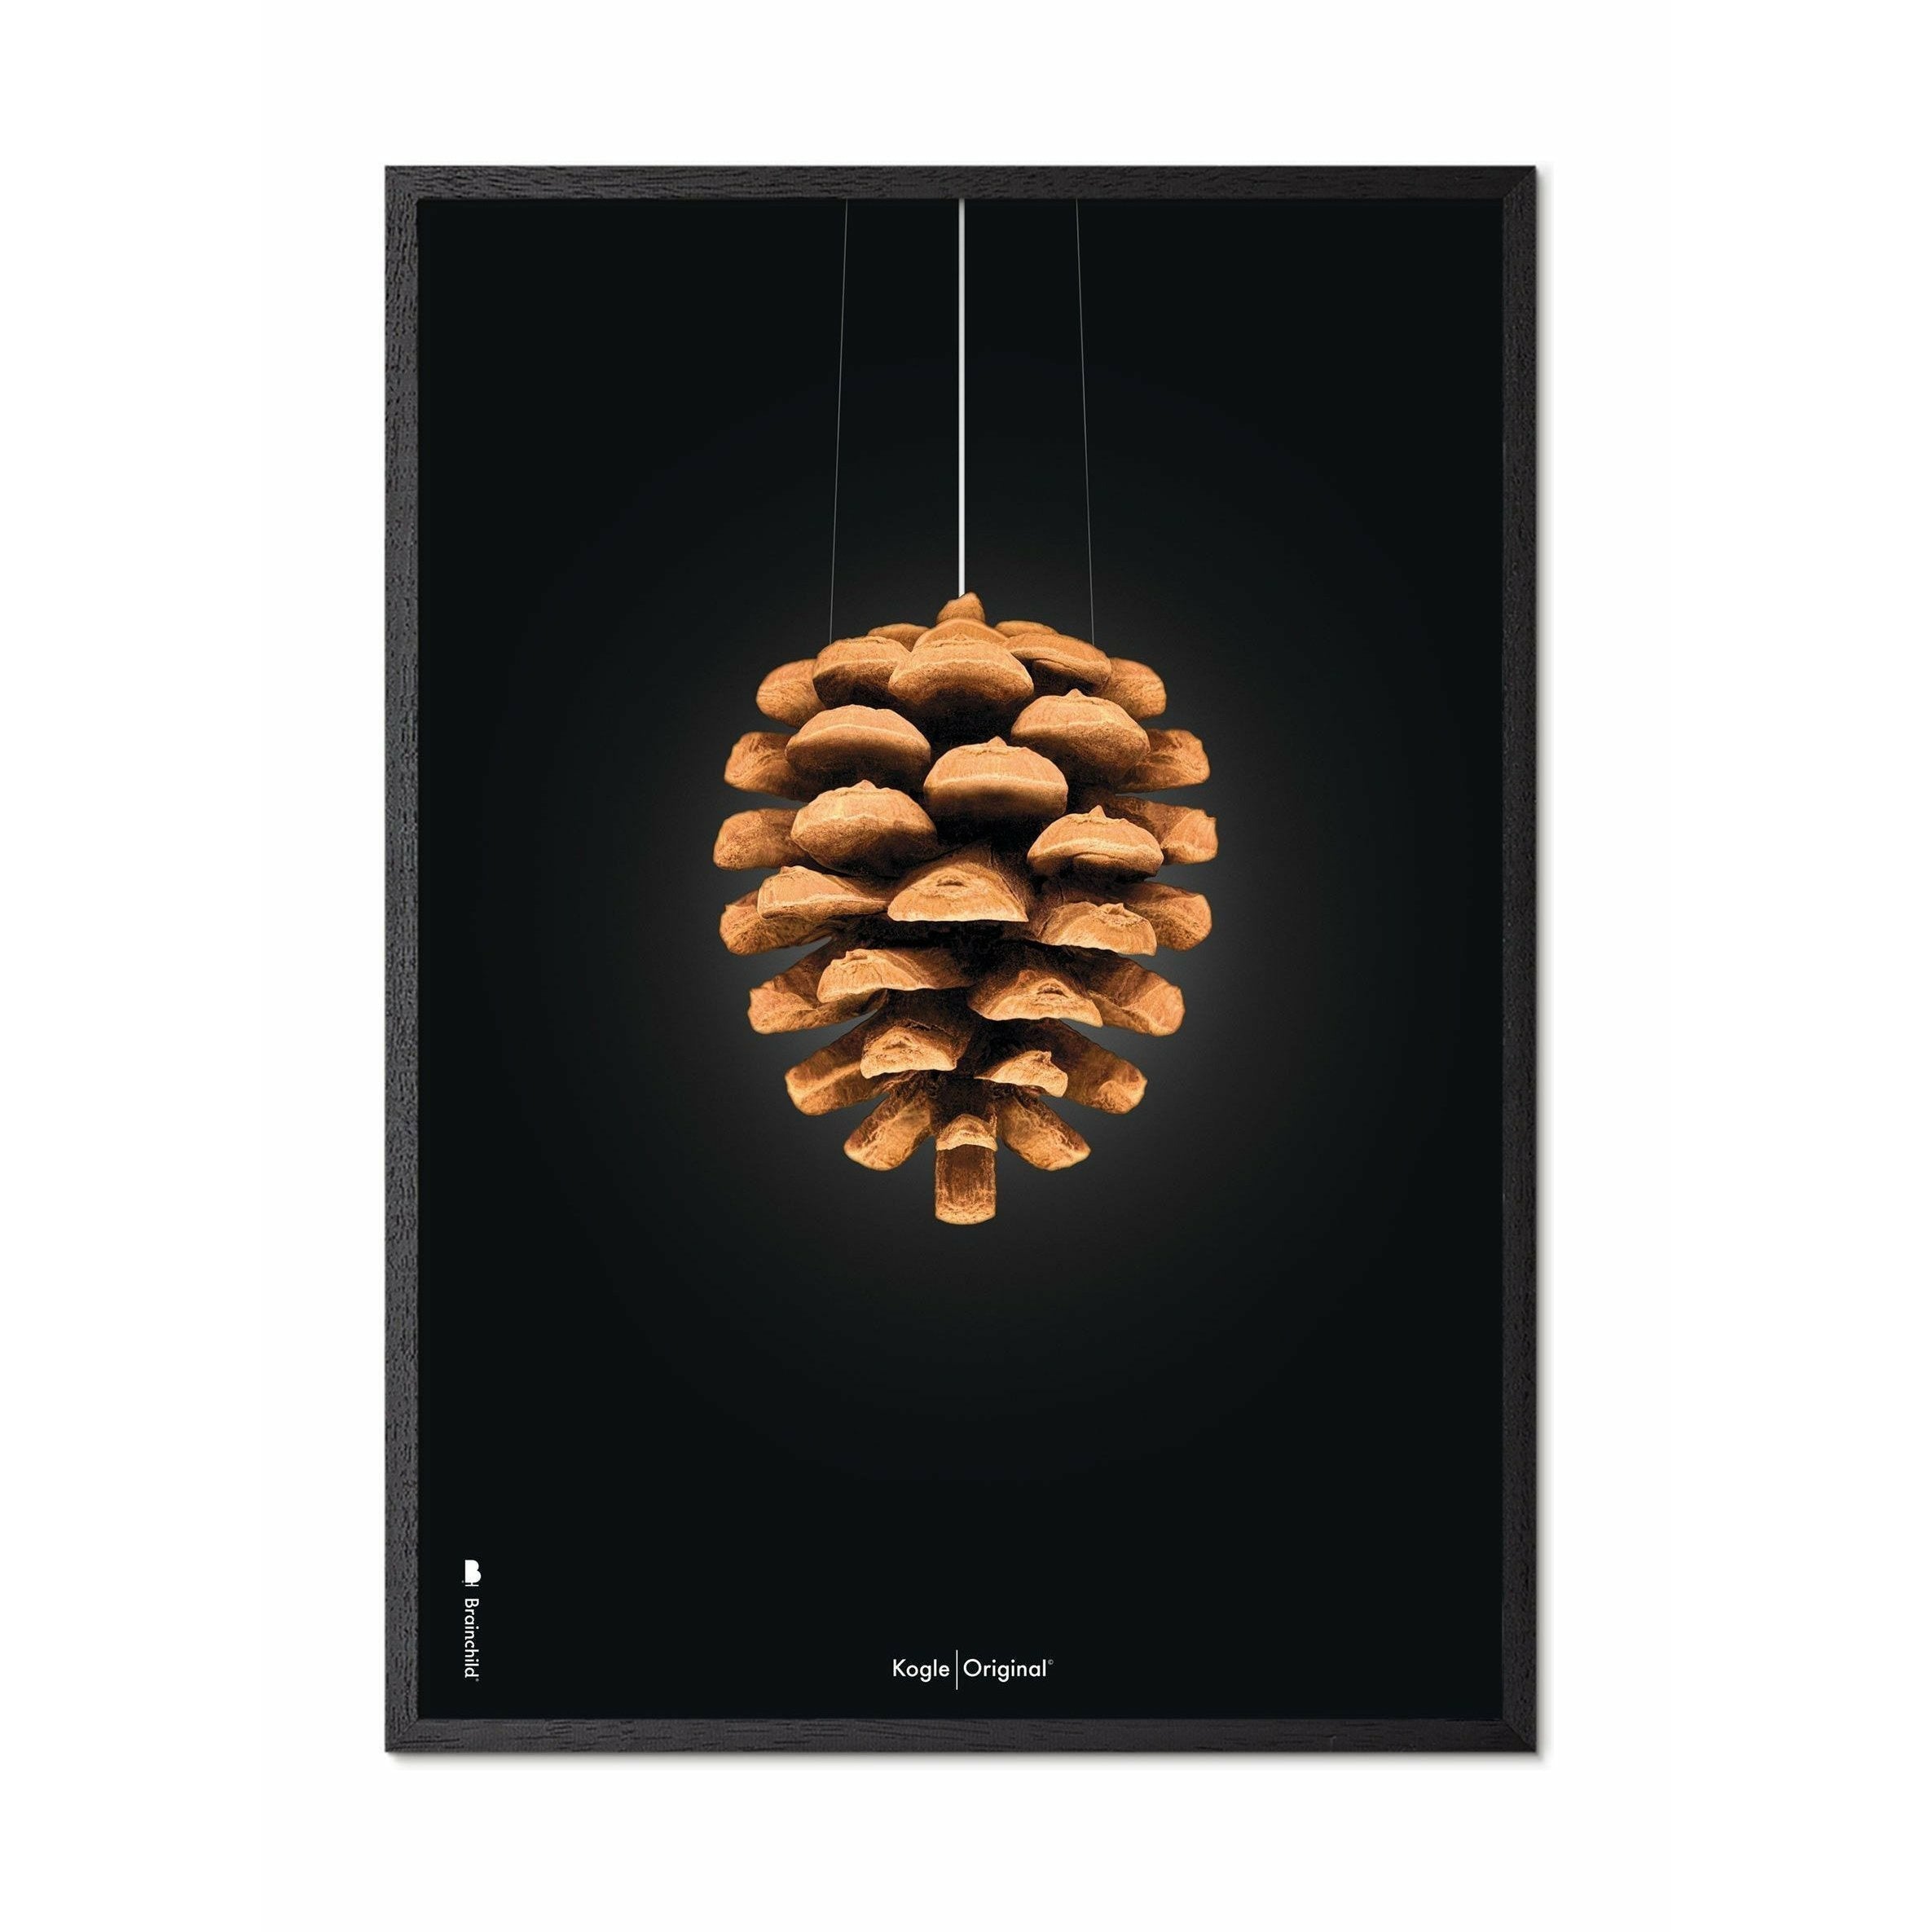 Brainchild Pine Cone Classic Poster, Frame Made Of Black Lacquered Wood 70x100 Cm, Black Background